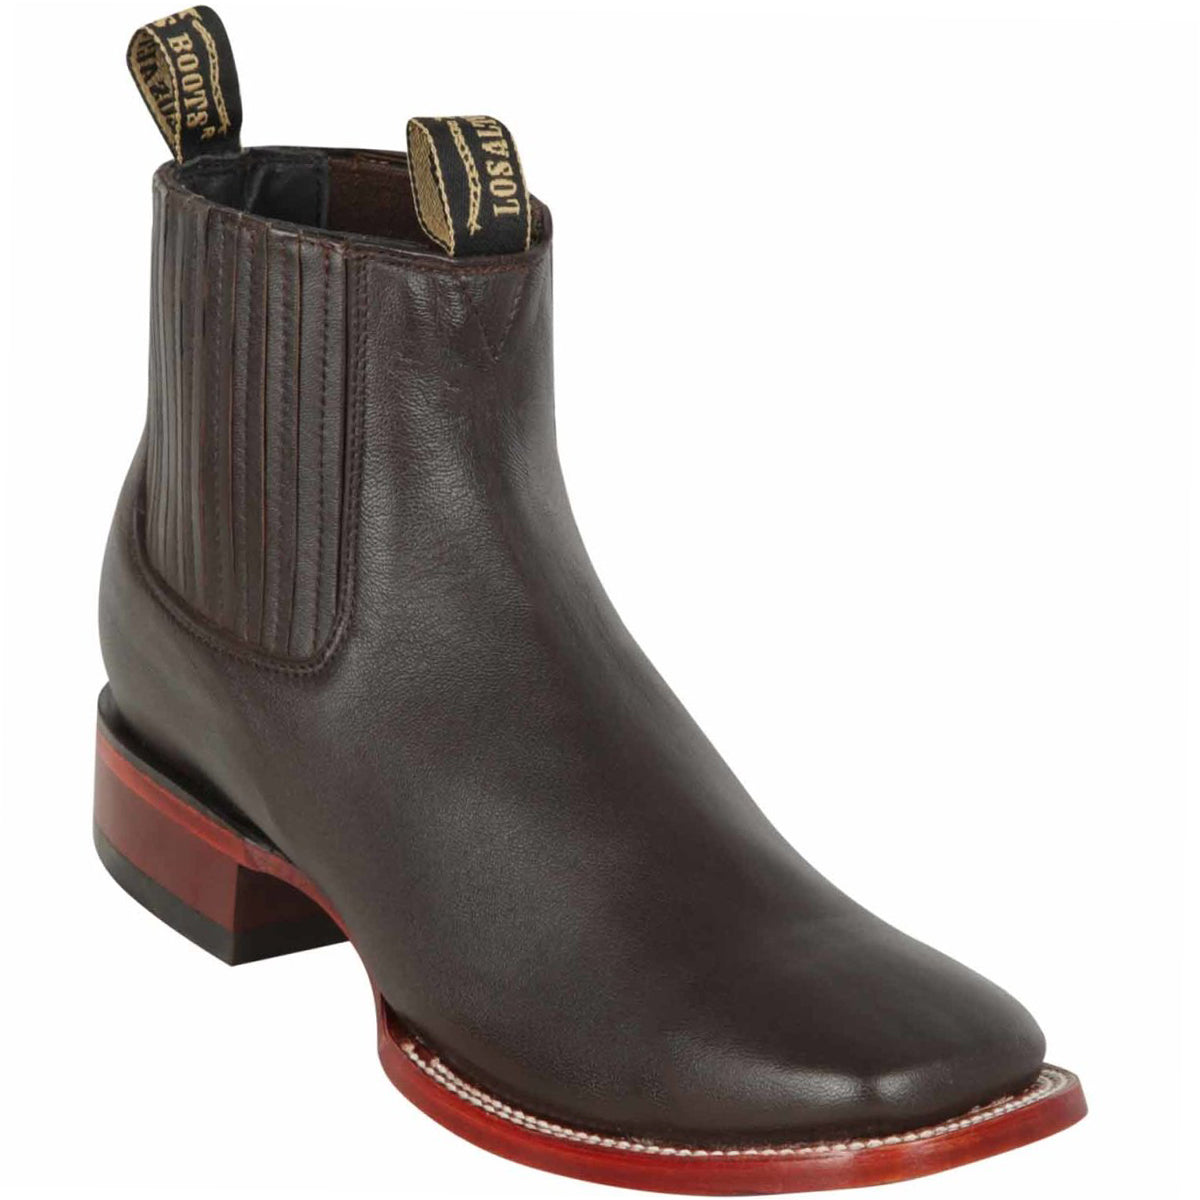 Dark Brown Square Toe Ankle Boots - Los Altos Boots